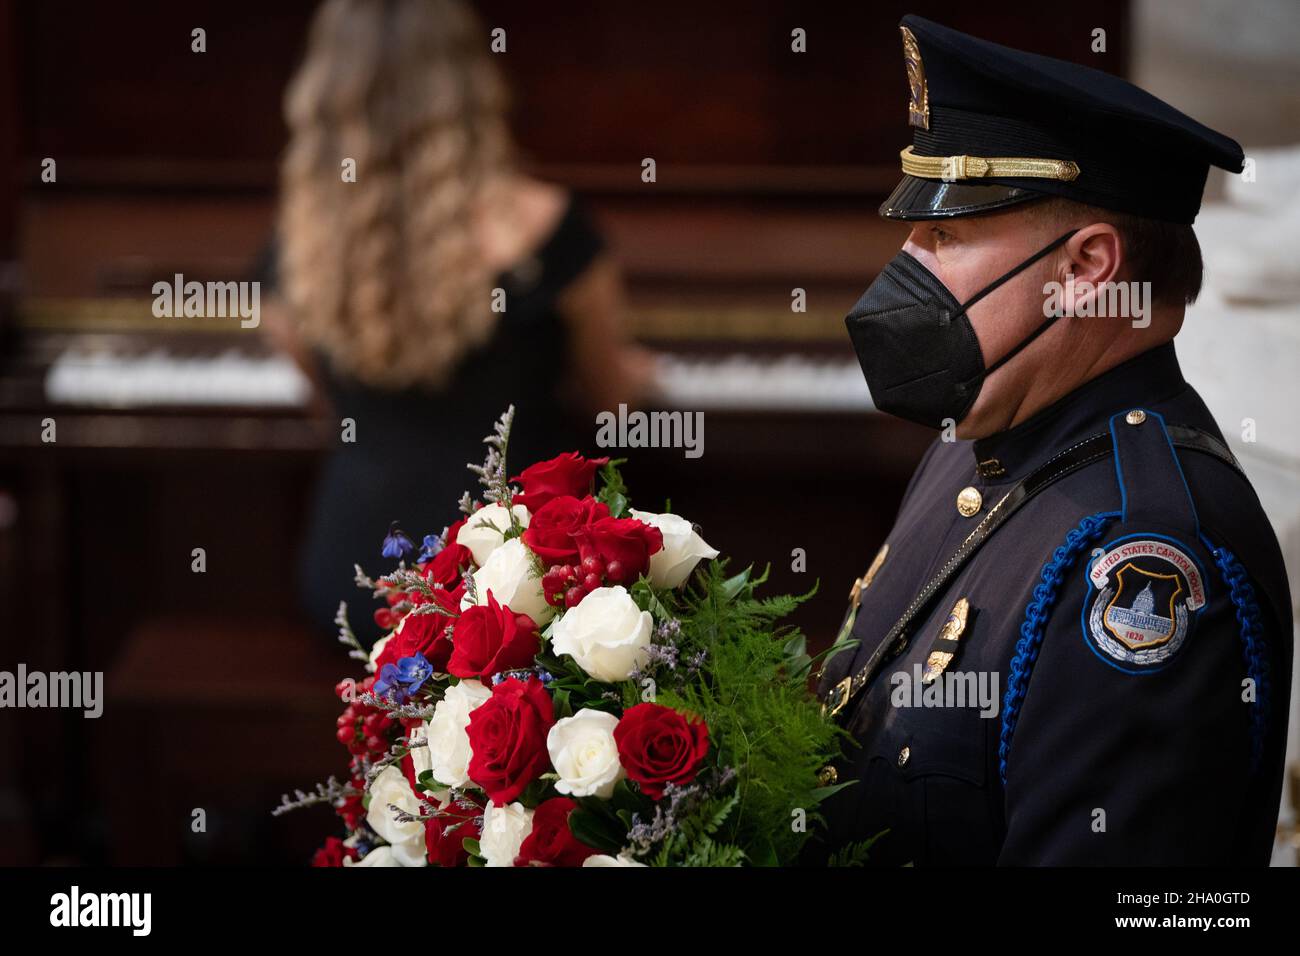 A Capitol Police officer pays respect to former Senator Robert J. Dole (R-KS) as he lies in state at the Rotunda of the U.S. Capitol in Washington, DC on Thursday, December 9, 2021.Credit: Sarahbeth Maney/Pool via CNP /MediaPunch Stock Photo